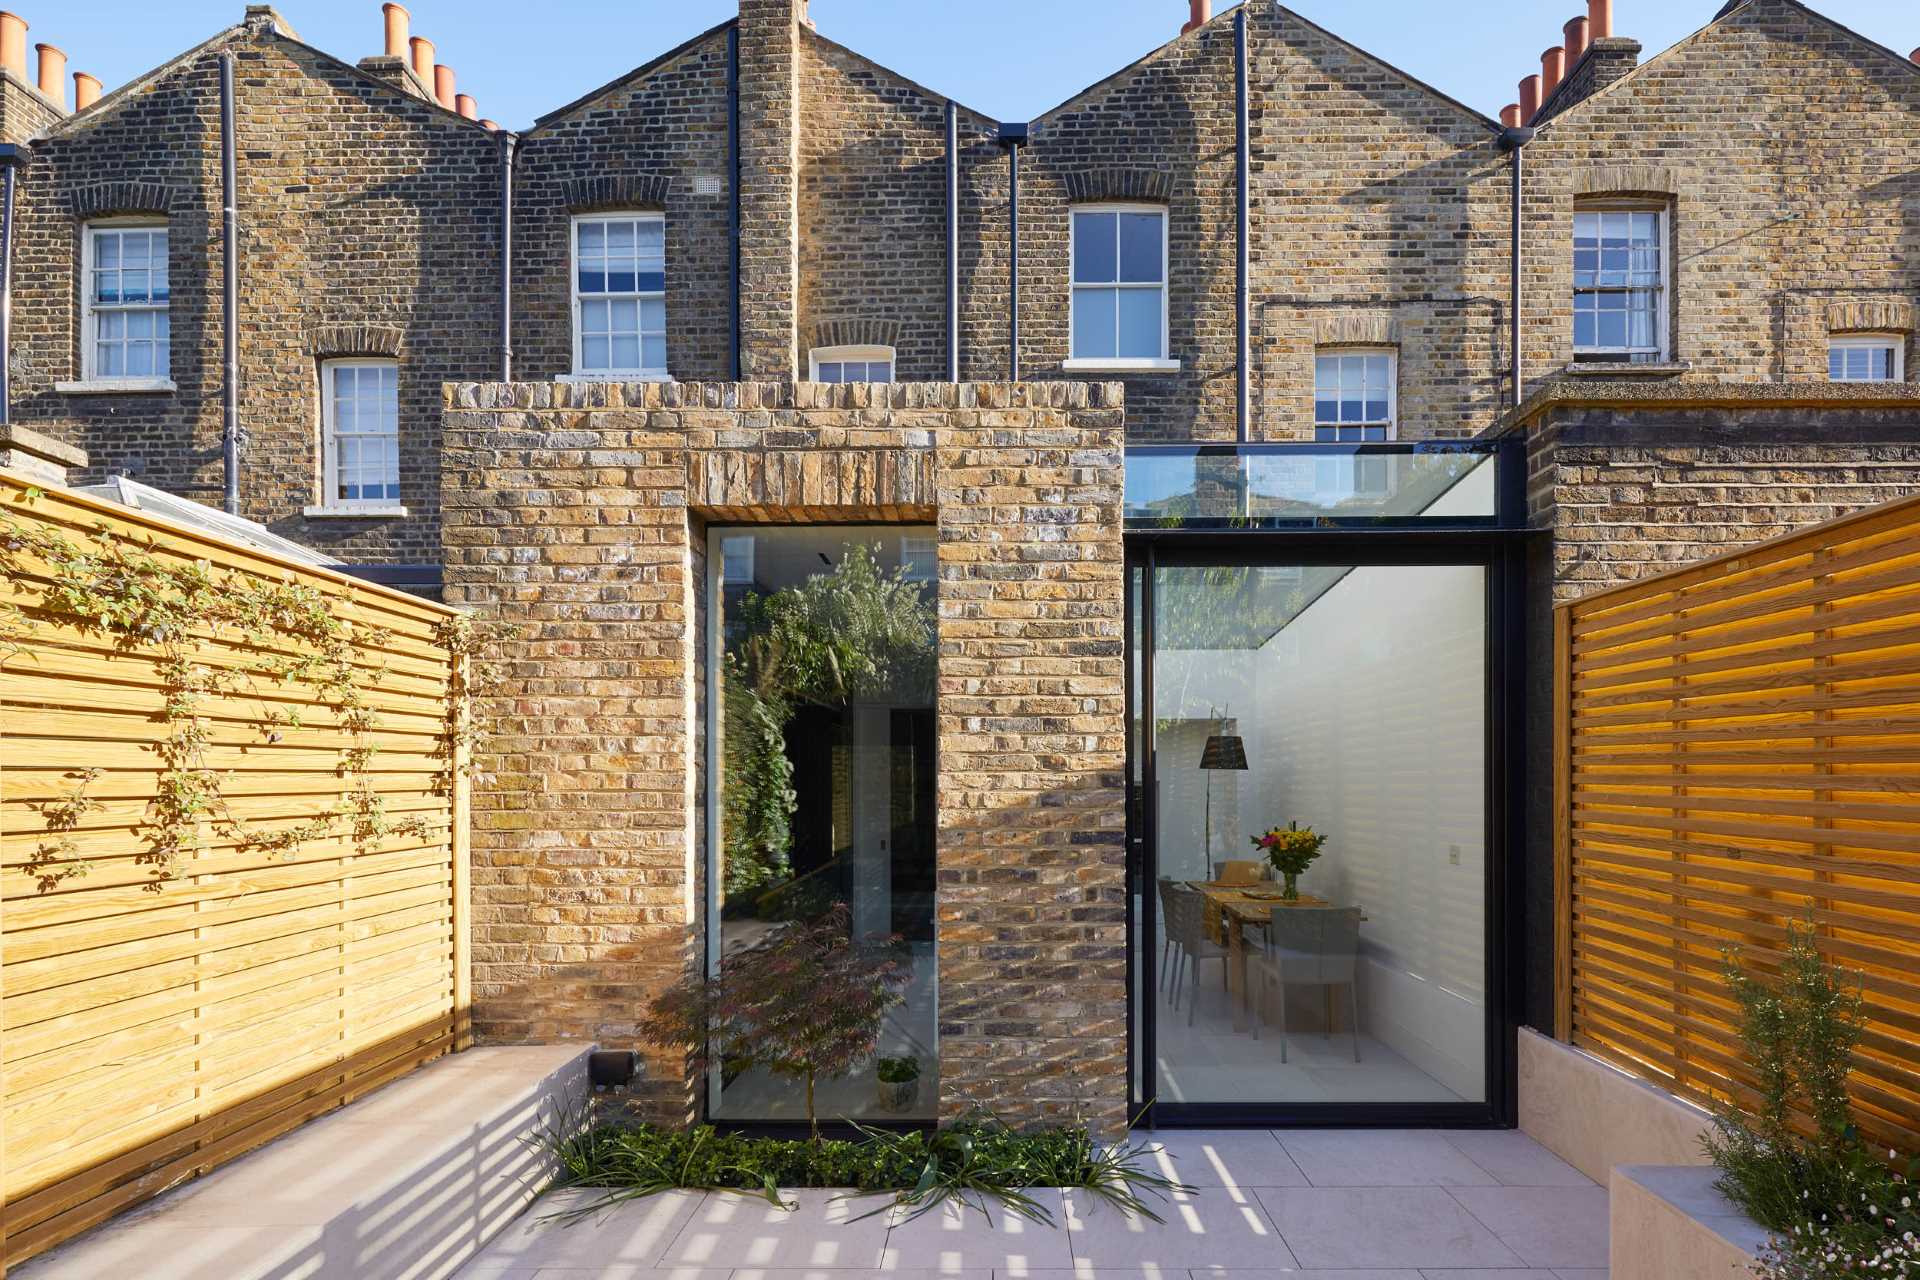 A modern brick and glass rear addition for a Grade II Listed Town House in Greater London, England.